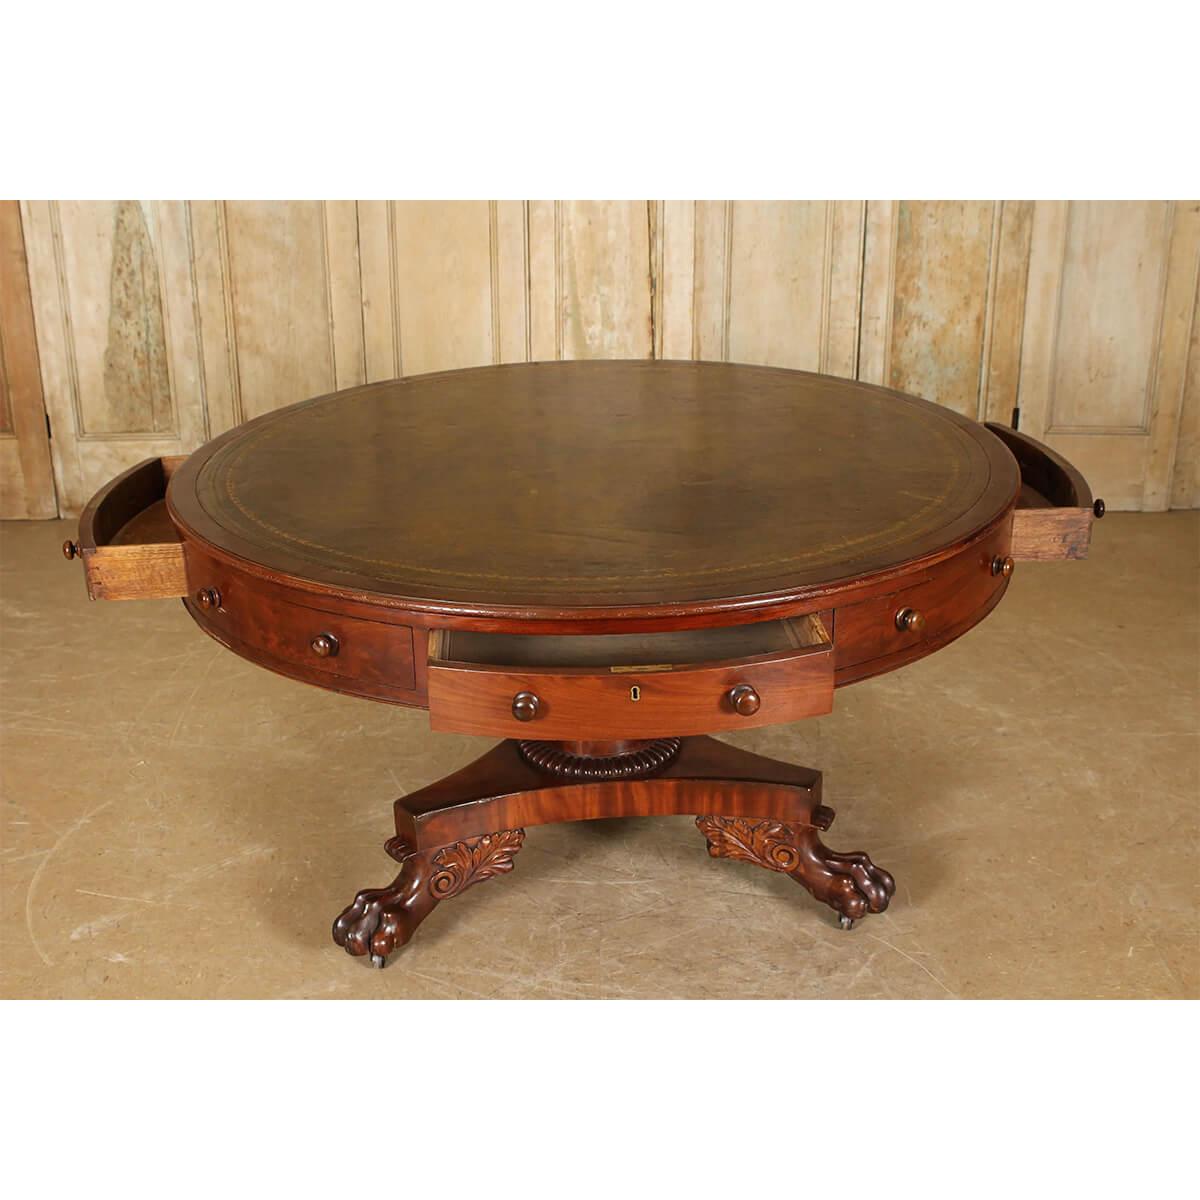 Leather Late Regency Mahogany Drum Table